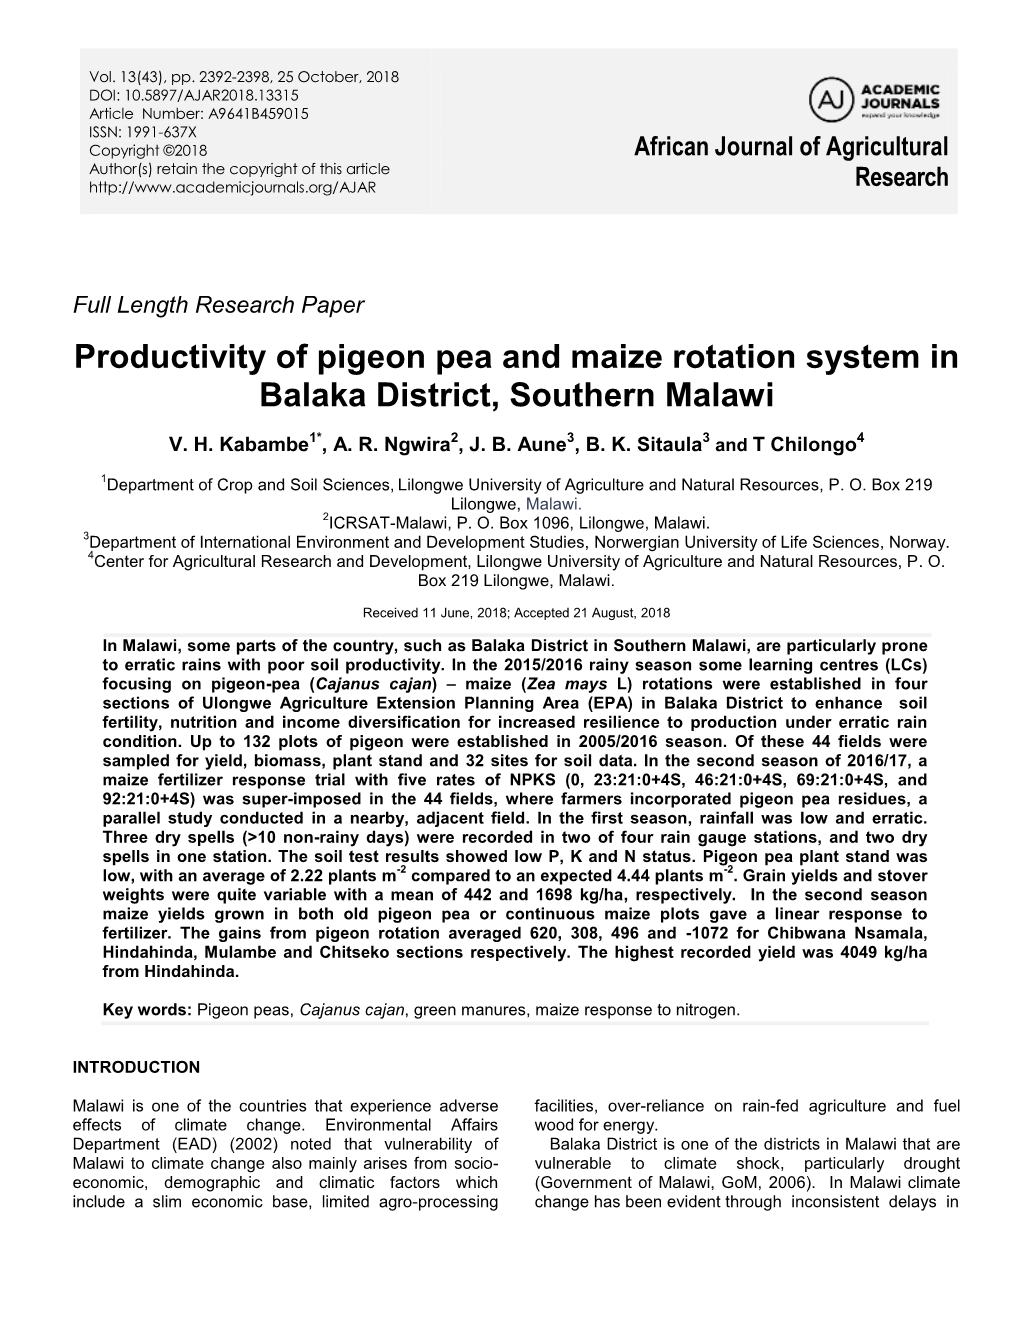 Productivity of Pigeon Pea and Maize Rotation System in Balaka District, Southern Malawi